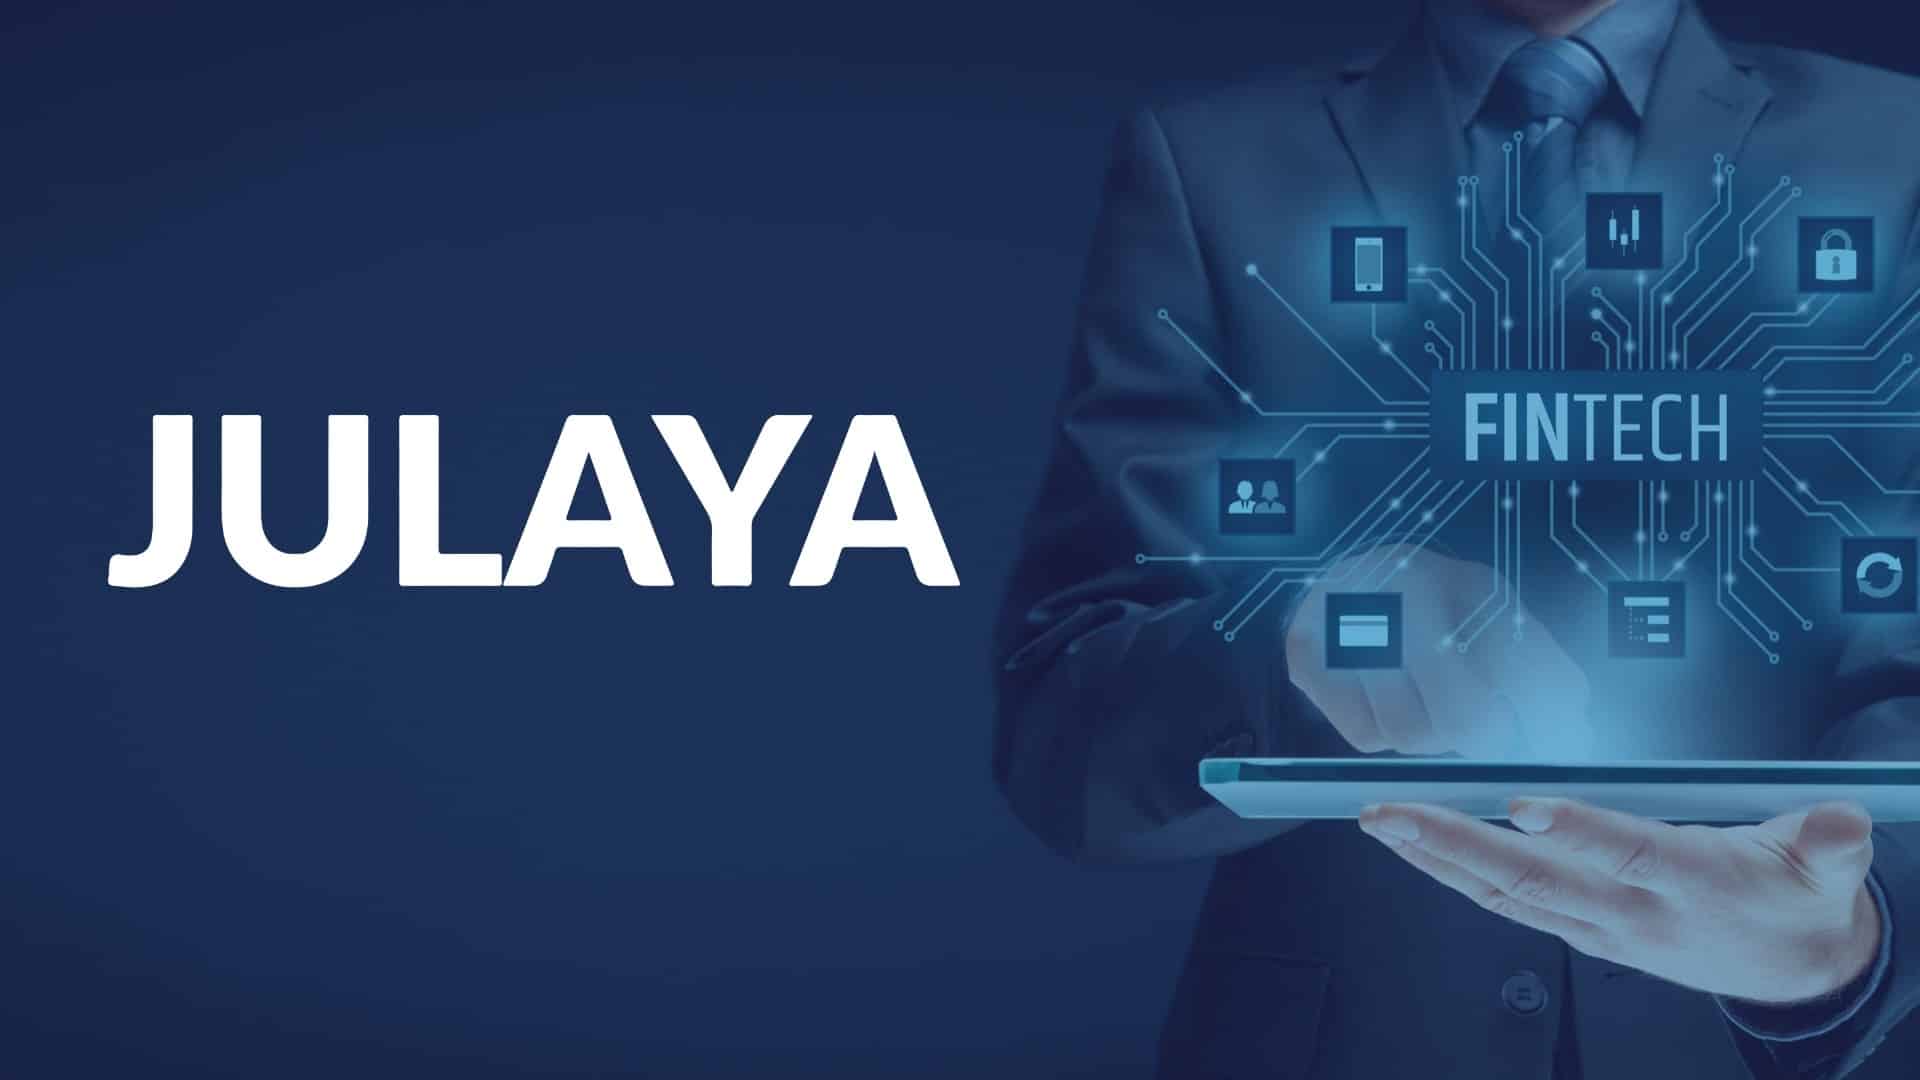 Ivory Coast’s Fintech Julaya Gets $550,000 in Funding to Expand Operations